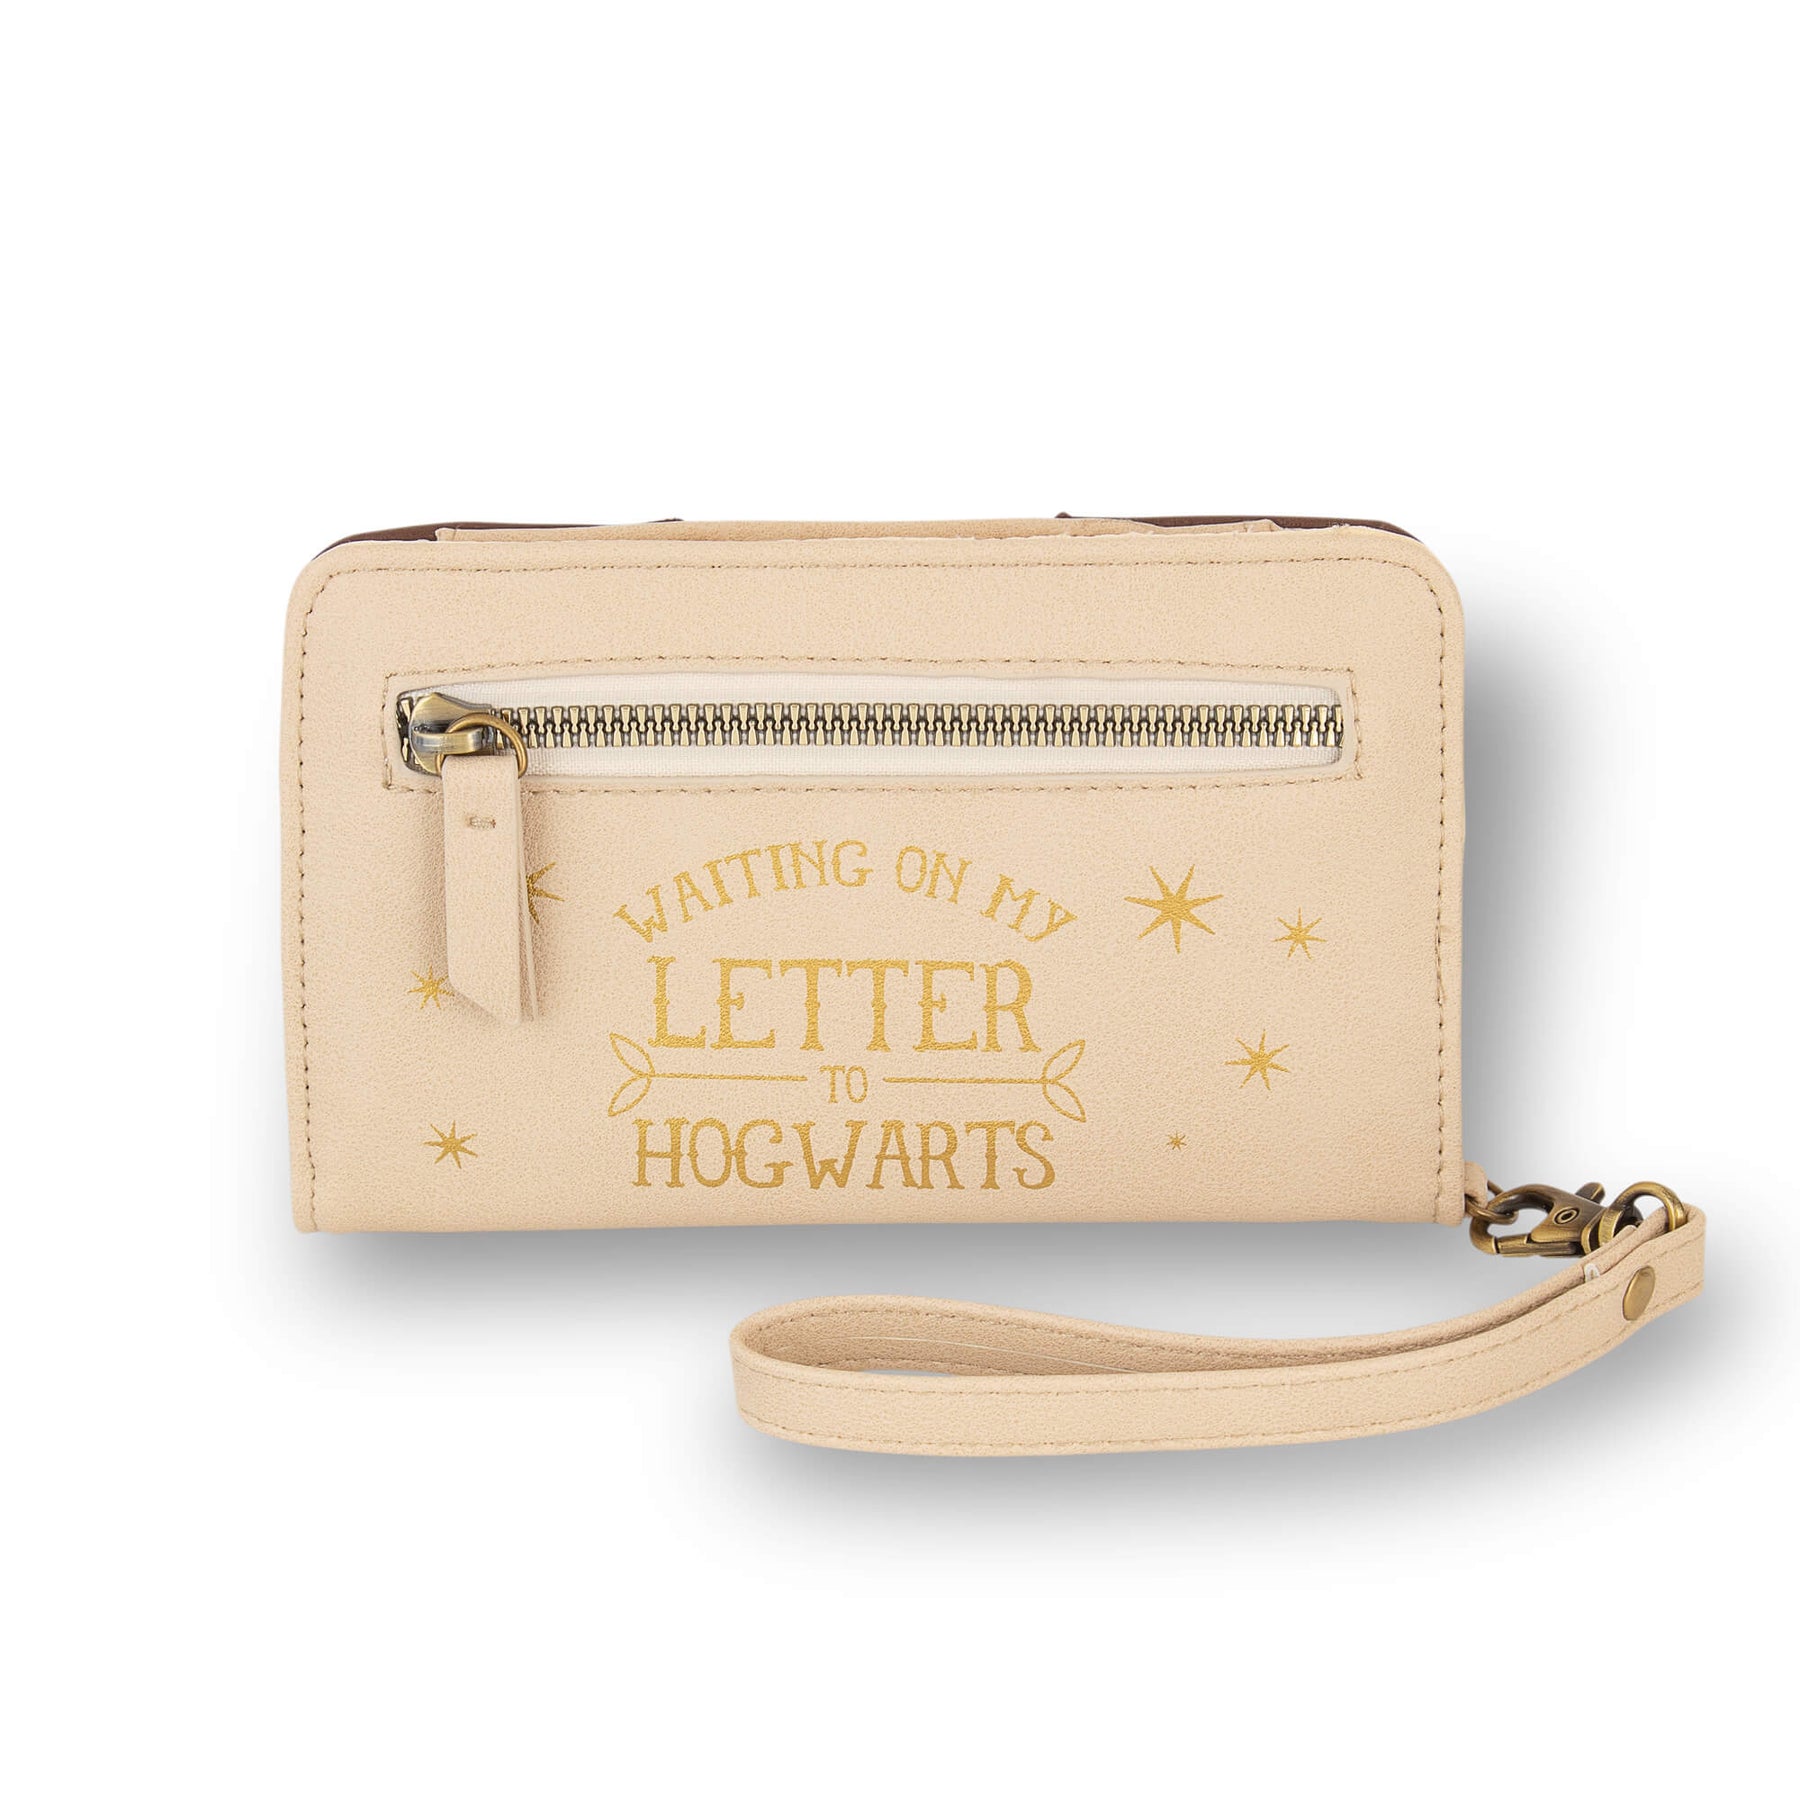 Organize Your Makeup With This Harry Potter Hogwarts Letter Cosmetics Bag  Set — Fashion and Fandom